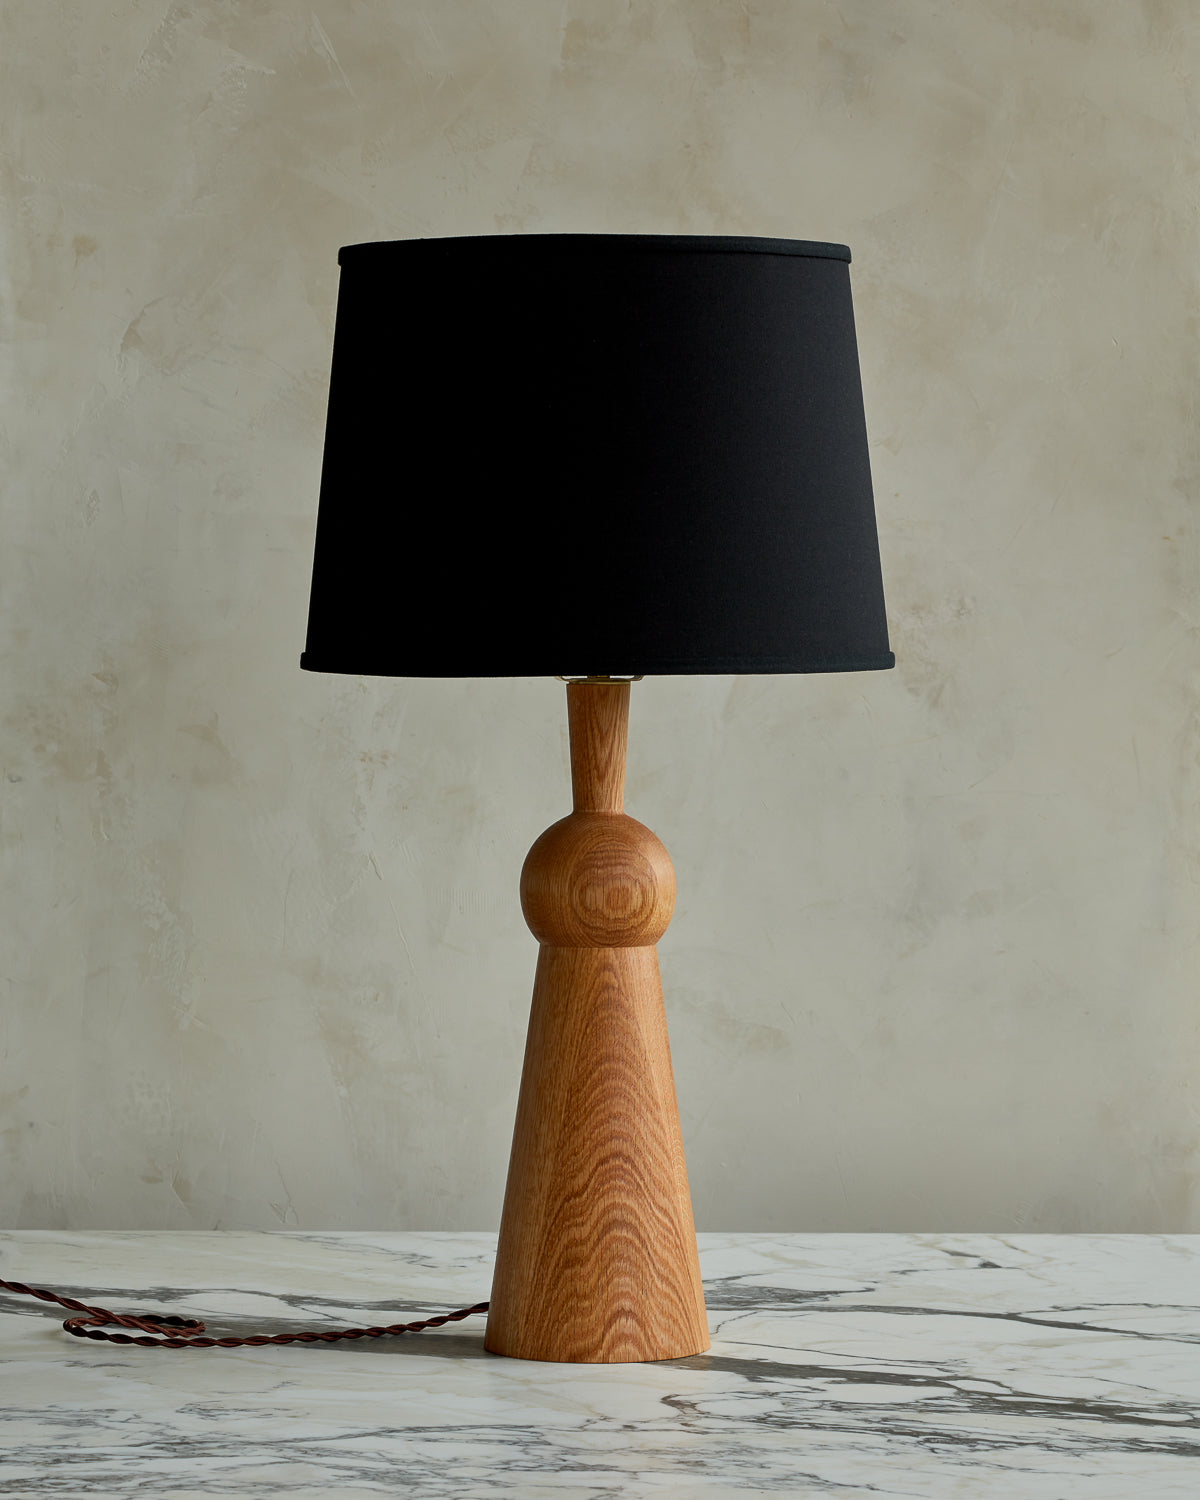 Natural red oak solid wood table lamp with gently tapered body and black linen shade